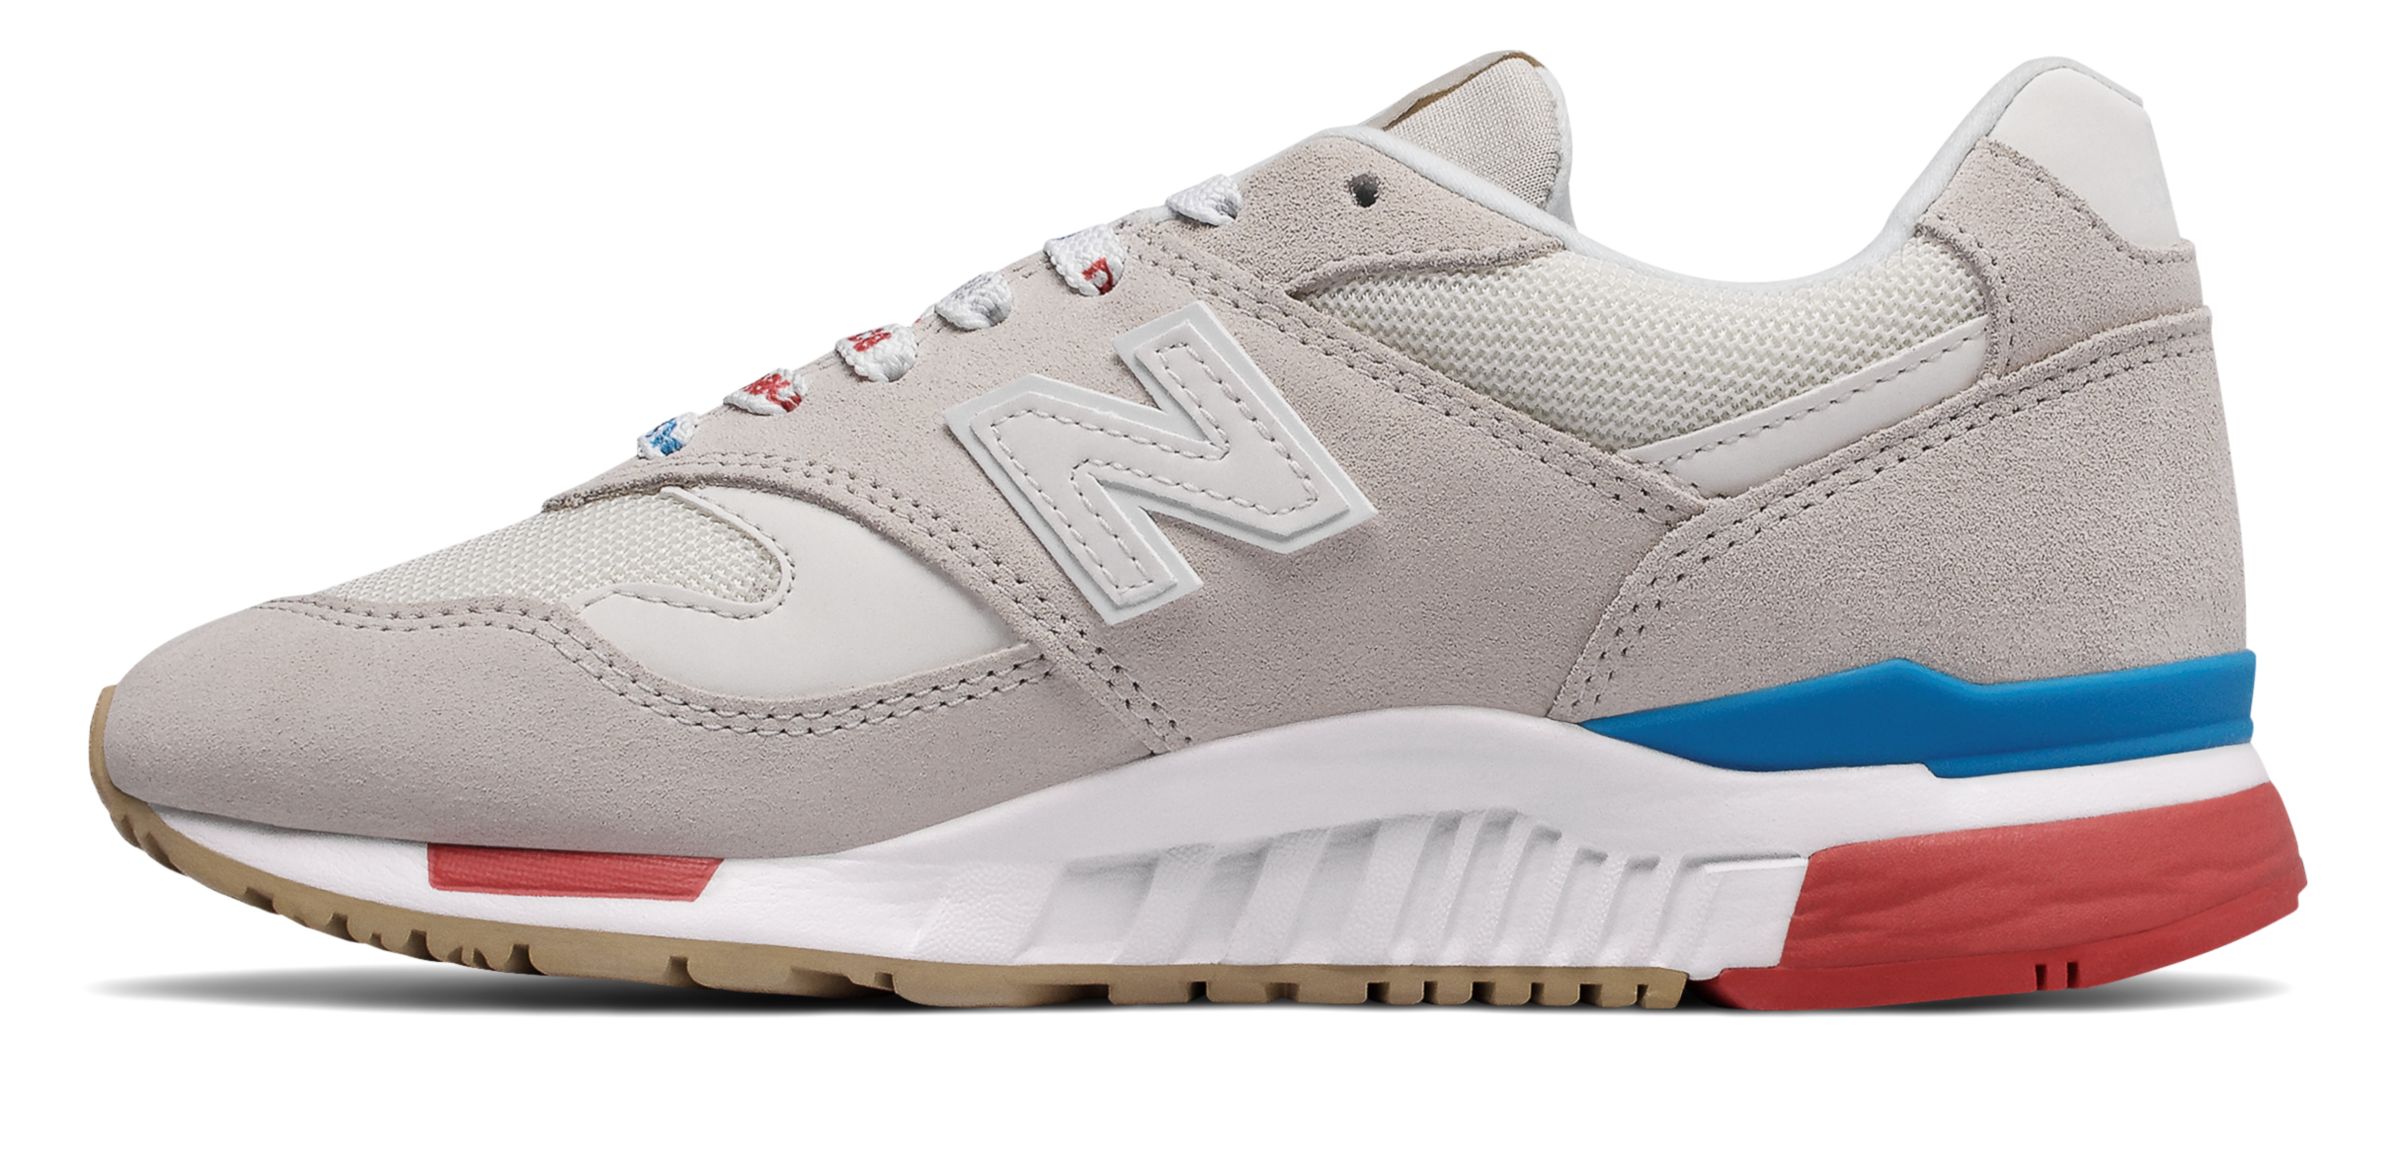 New Balance WL840-R on Sale - Discounts Up to 20% Off on WL840RTS at Joe's  New Balance Outlet